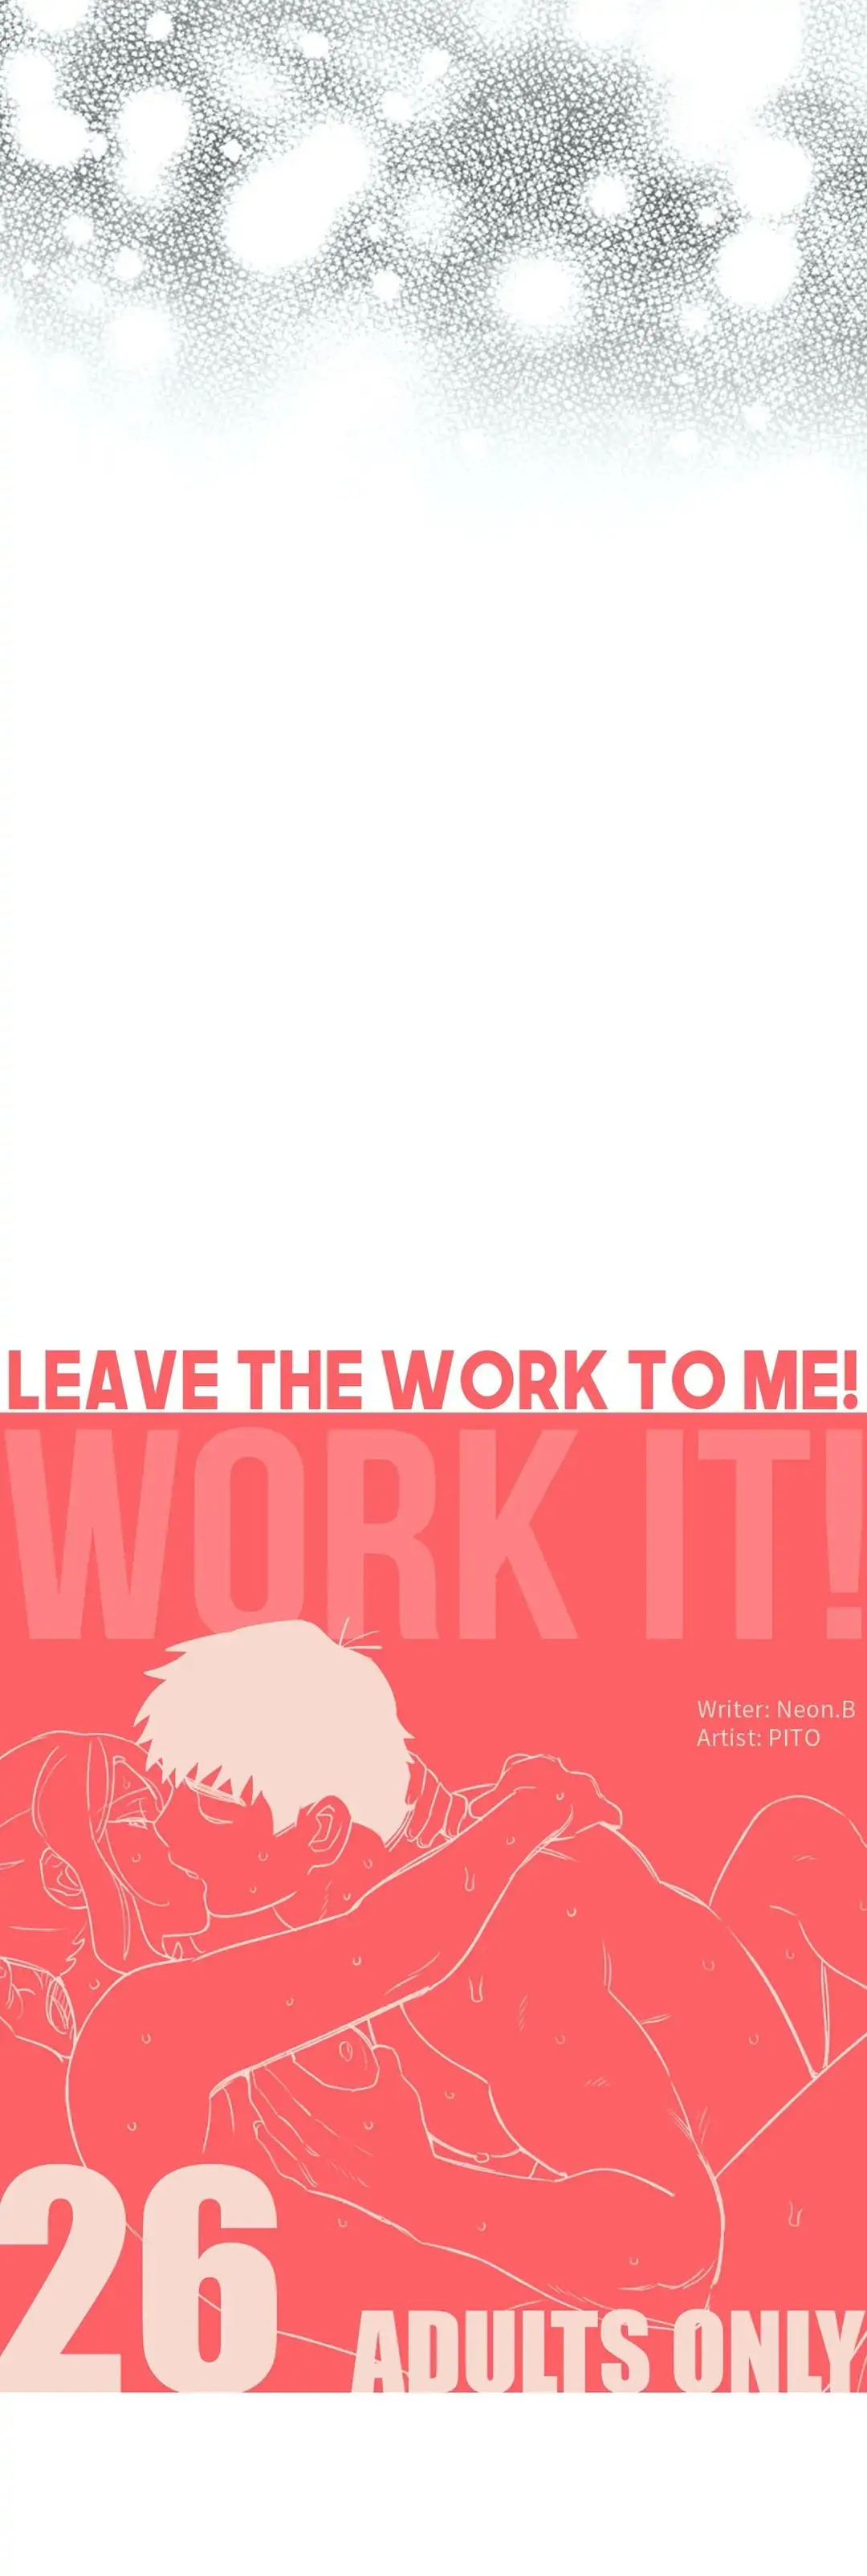 Leave the work to me! image